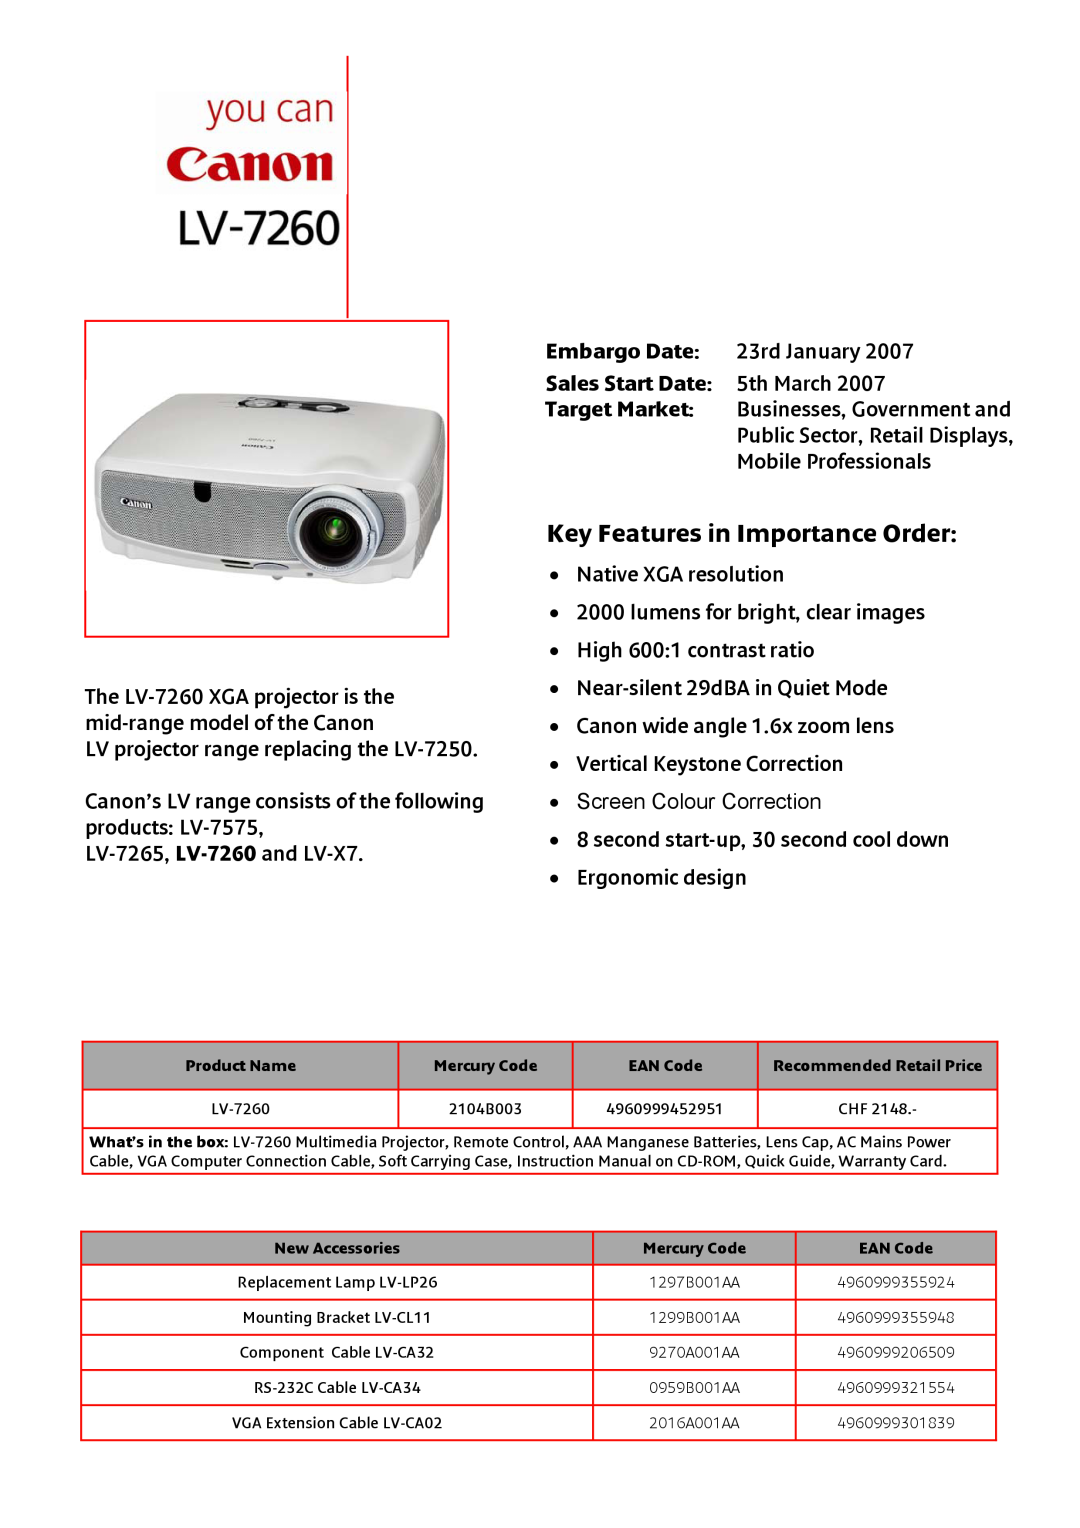 Canon LV-7260 instruction manual Key Features in Importance Order, Embargo Date, Sales Start Date, Target Market 